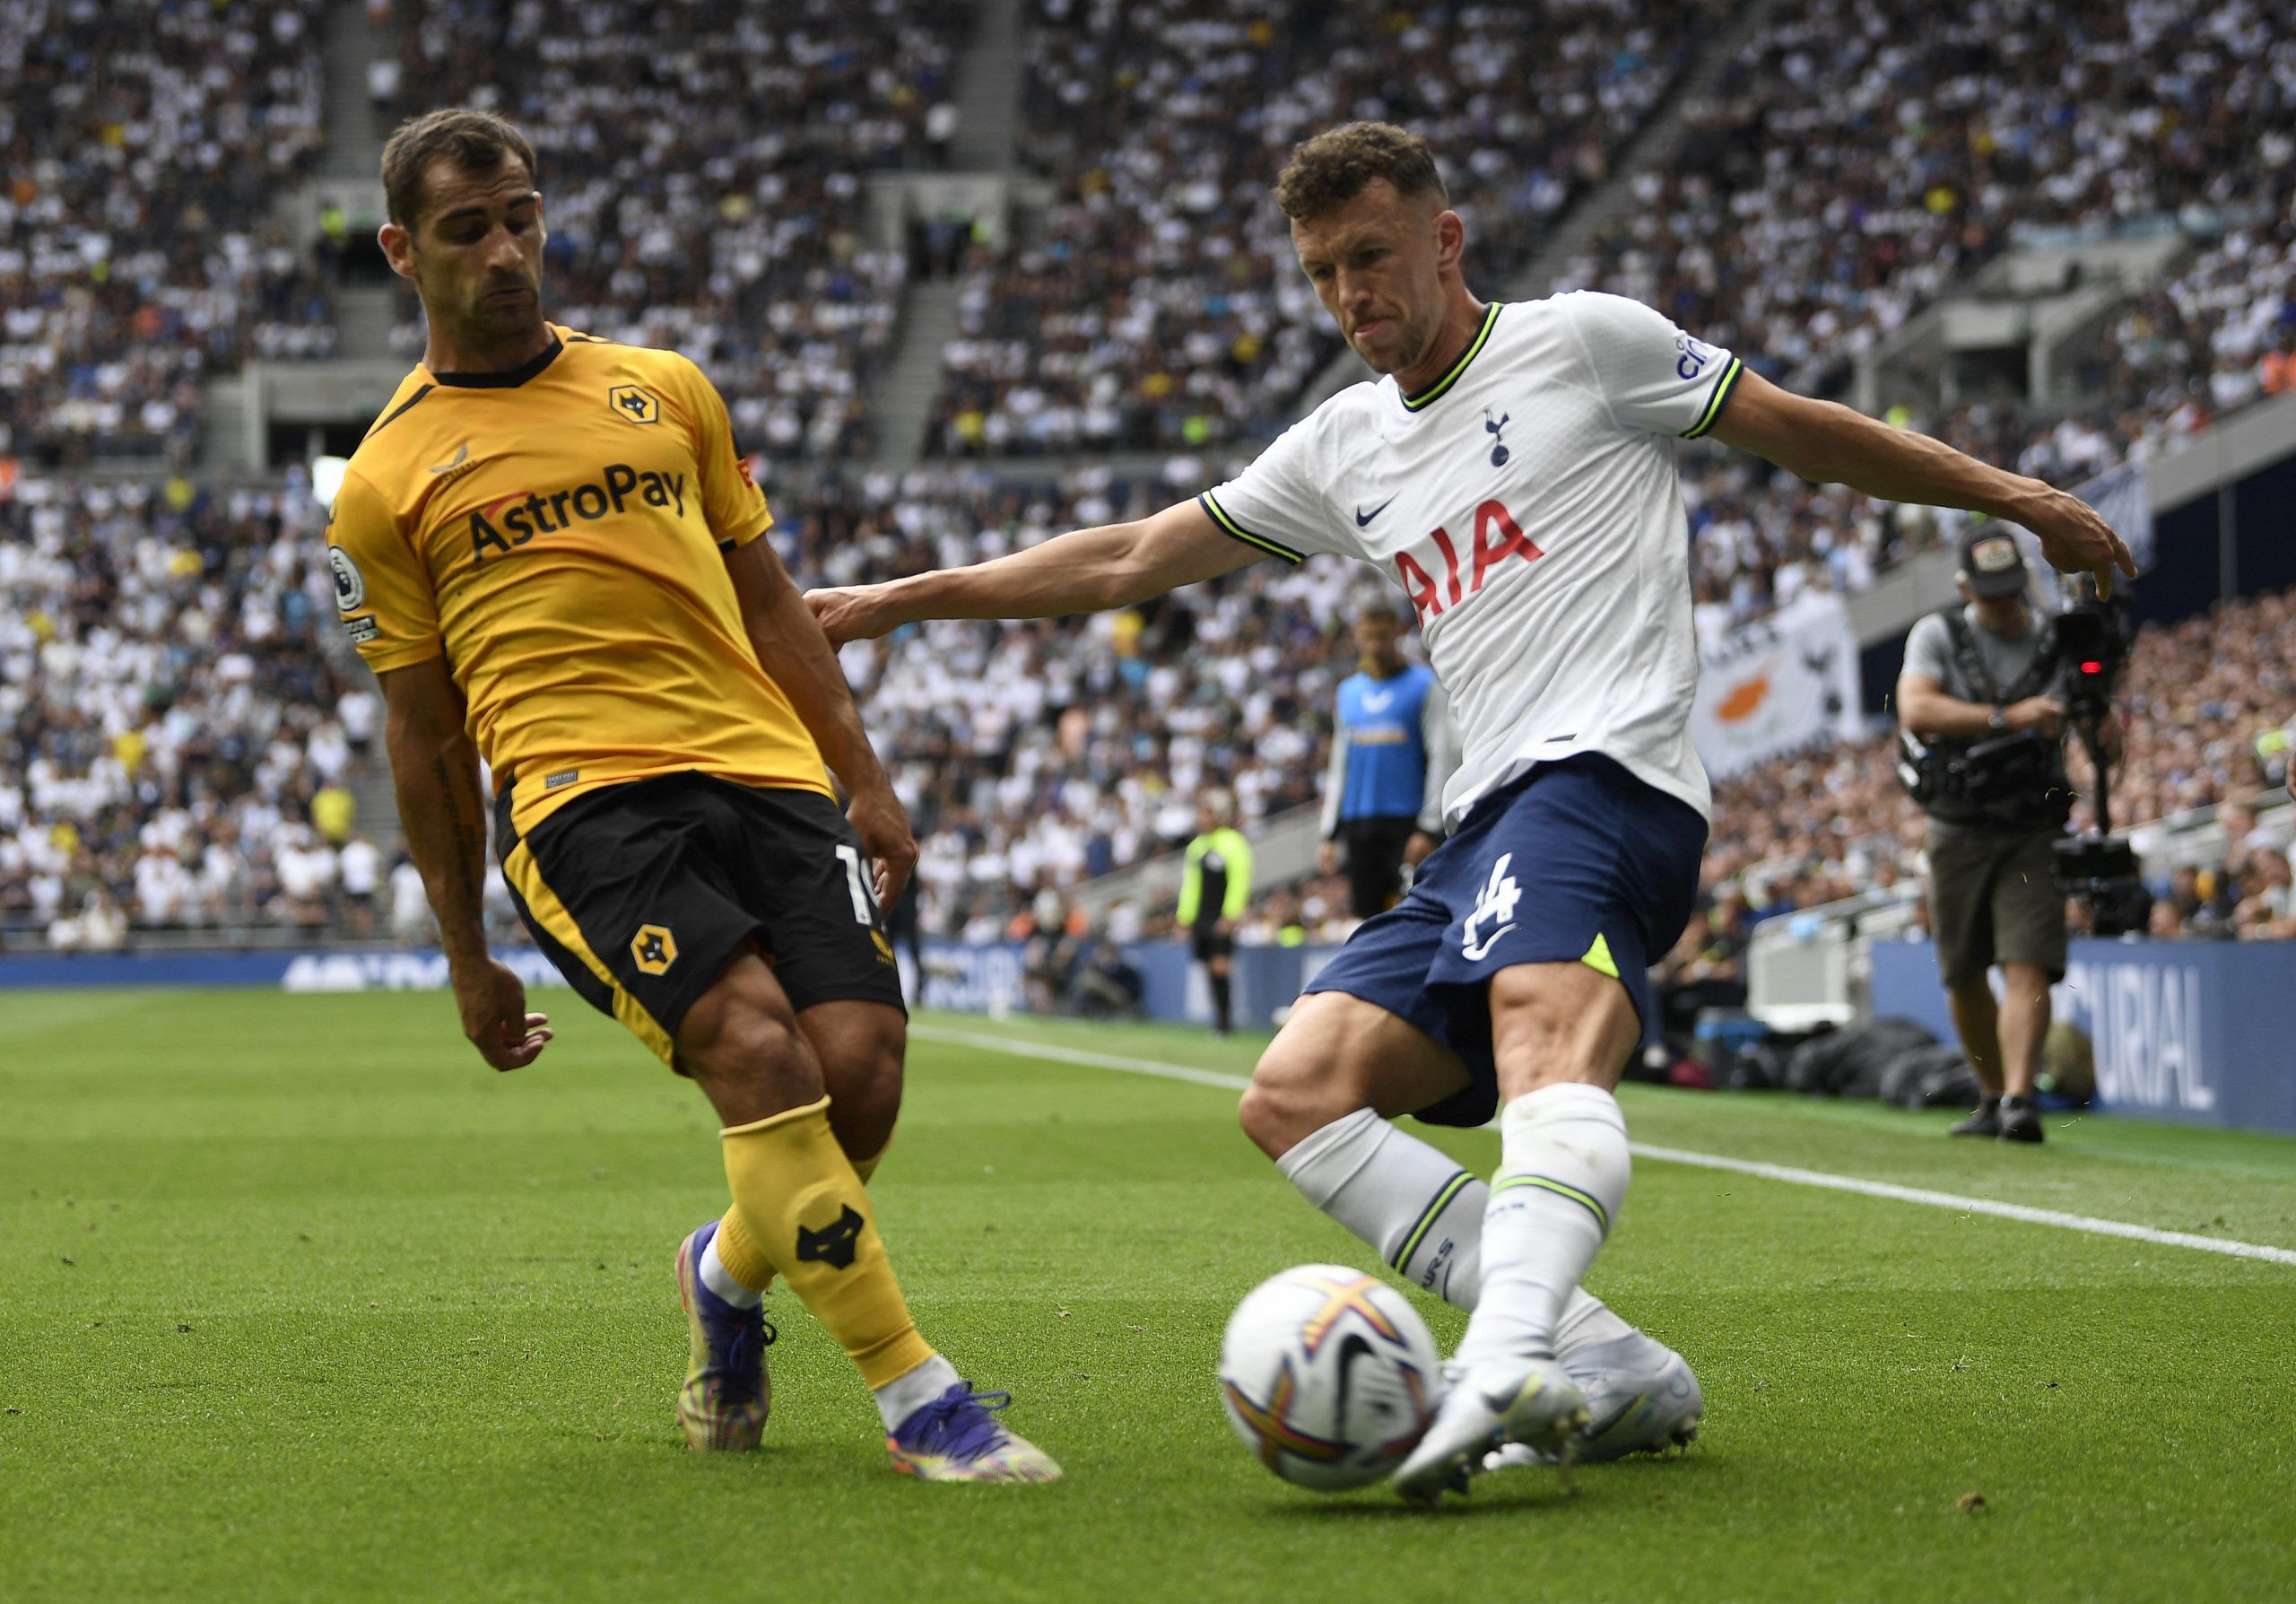 Soccer Football - Premier League - Tottenham Hotspur v Wolverhampton Wanderers - Tottenham Hotspur Stadium, London, Britain - August 20, 2022 Wolverhampton Wanderers' Jonny in action with Tottenham Hotspur's Ivan Perisic REUTERS/Tony Obrien EDITORIAL USE ONLY. No use with unauthorized audio, video, data, fixture lists, club/league logos or 'live' services. Online in-match use limited to 75 images, no video emulation. No use in betting, games or single club /league/player publications.  Please co